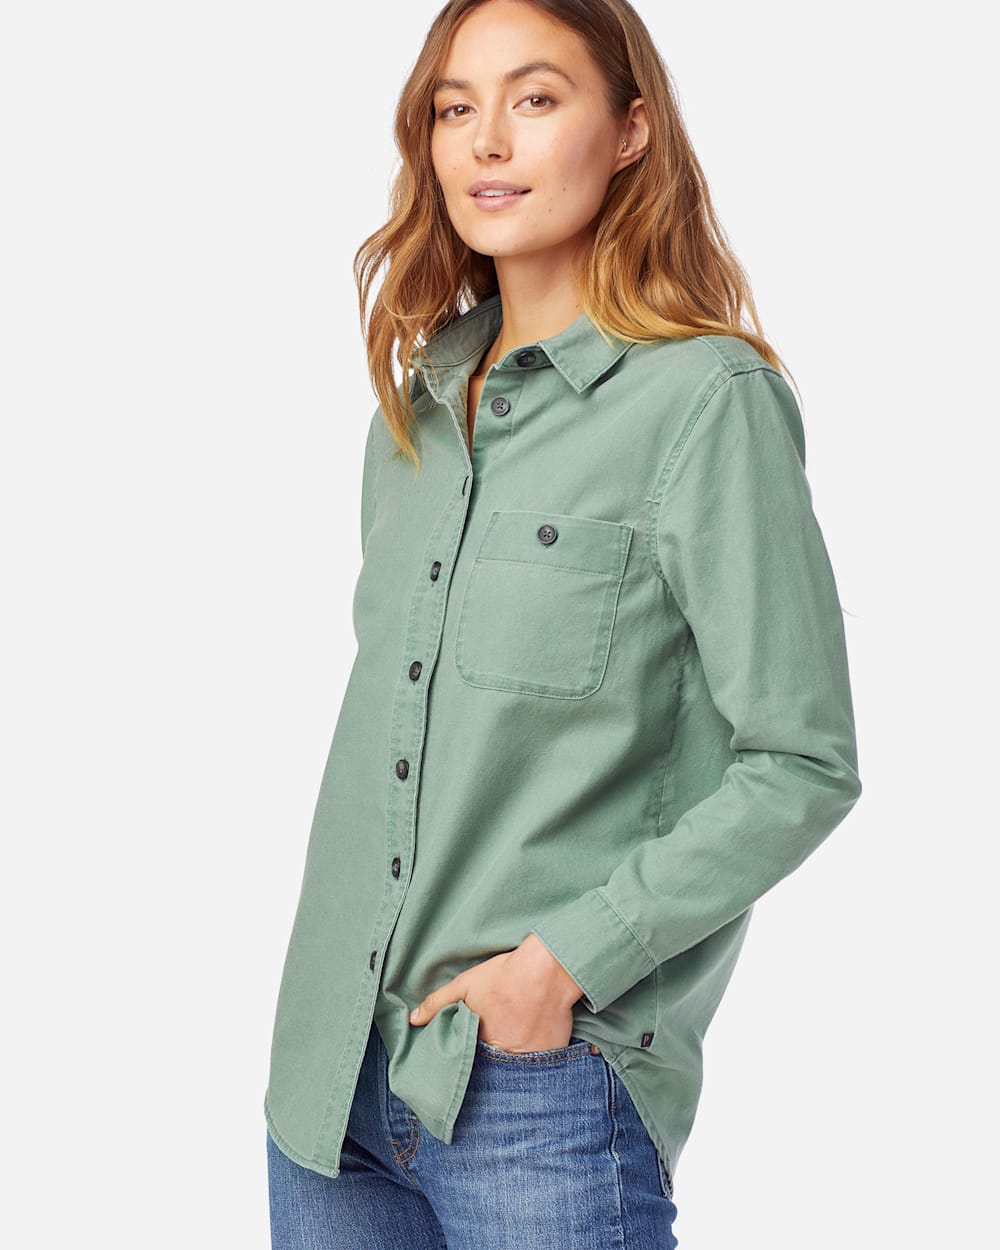 WOMEN'S BEACH SHACK SHIRT IN SPRUCE GREEN image number 1